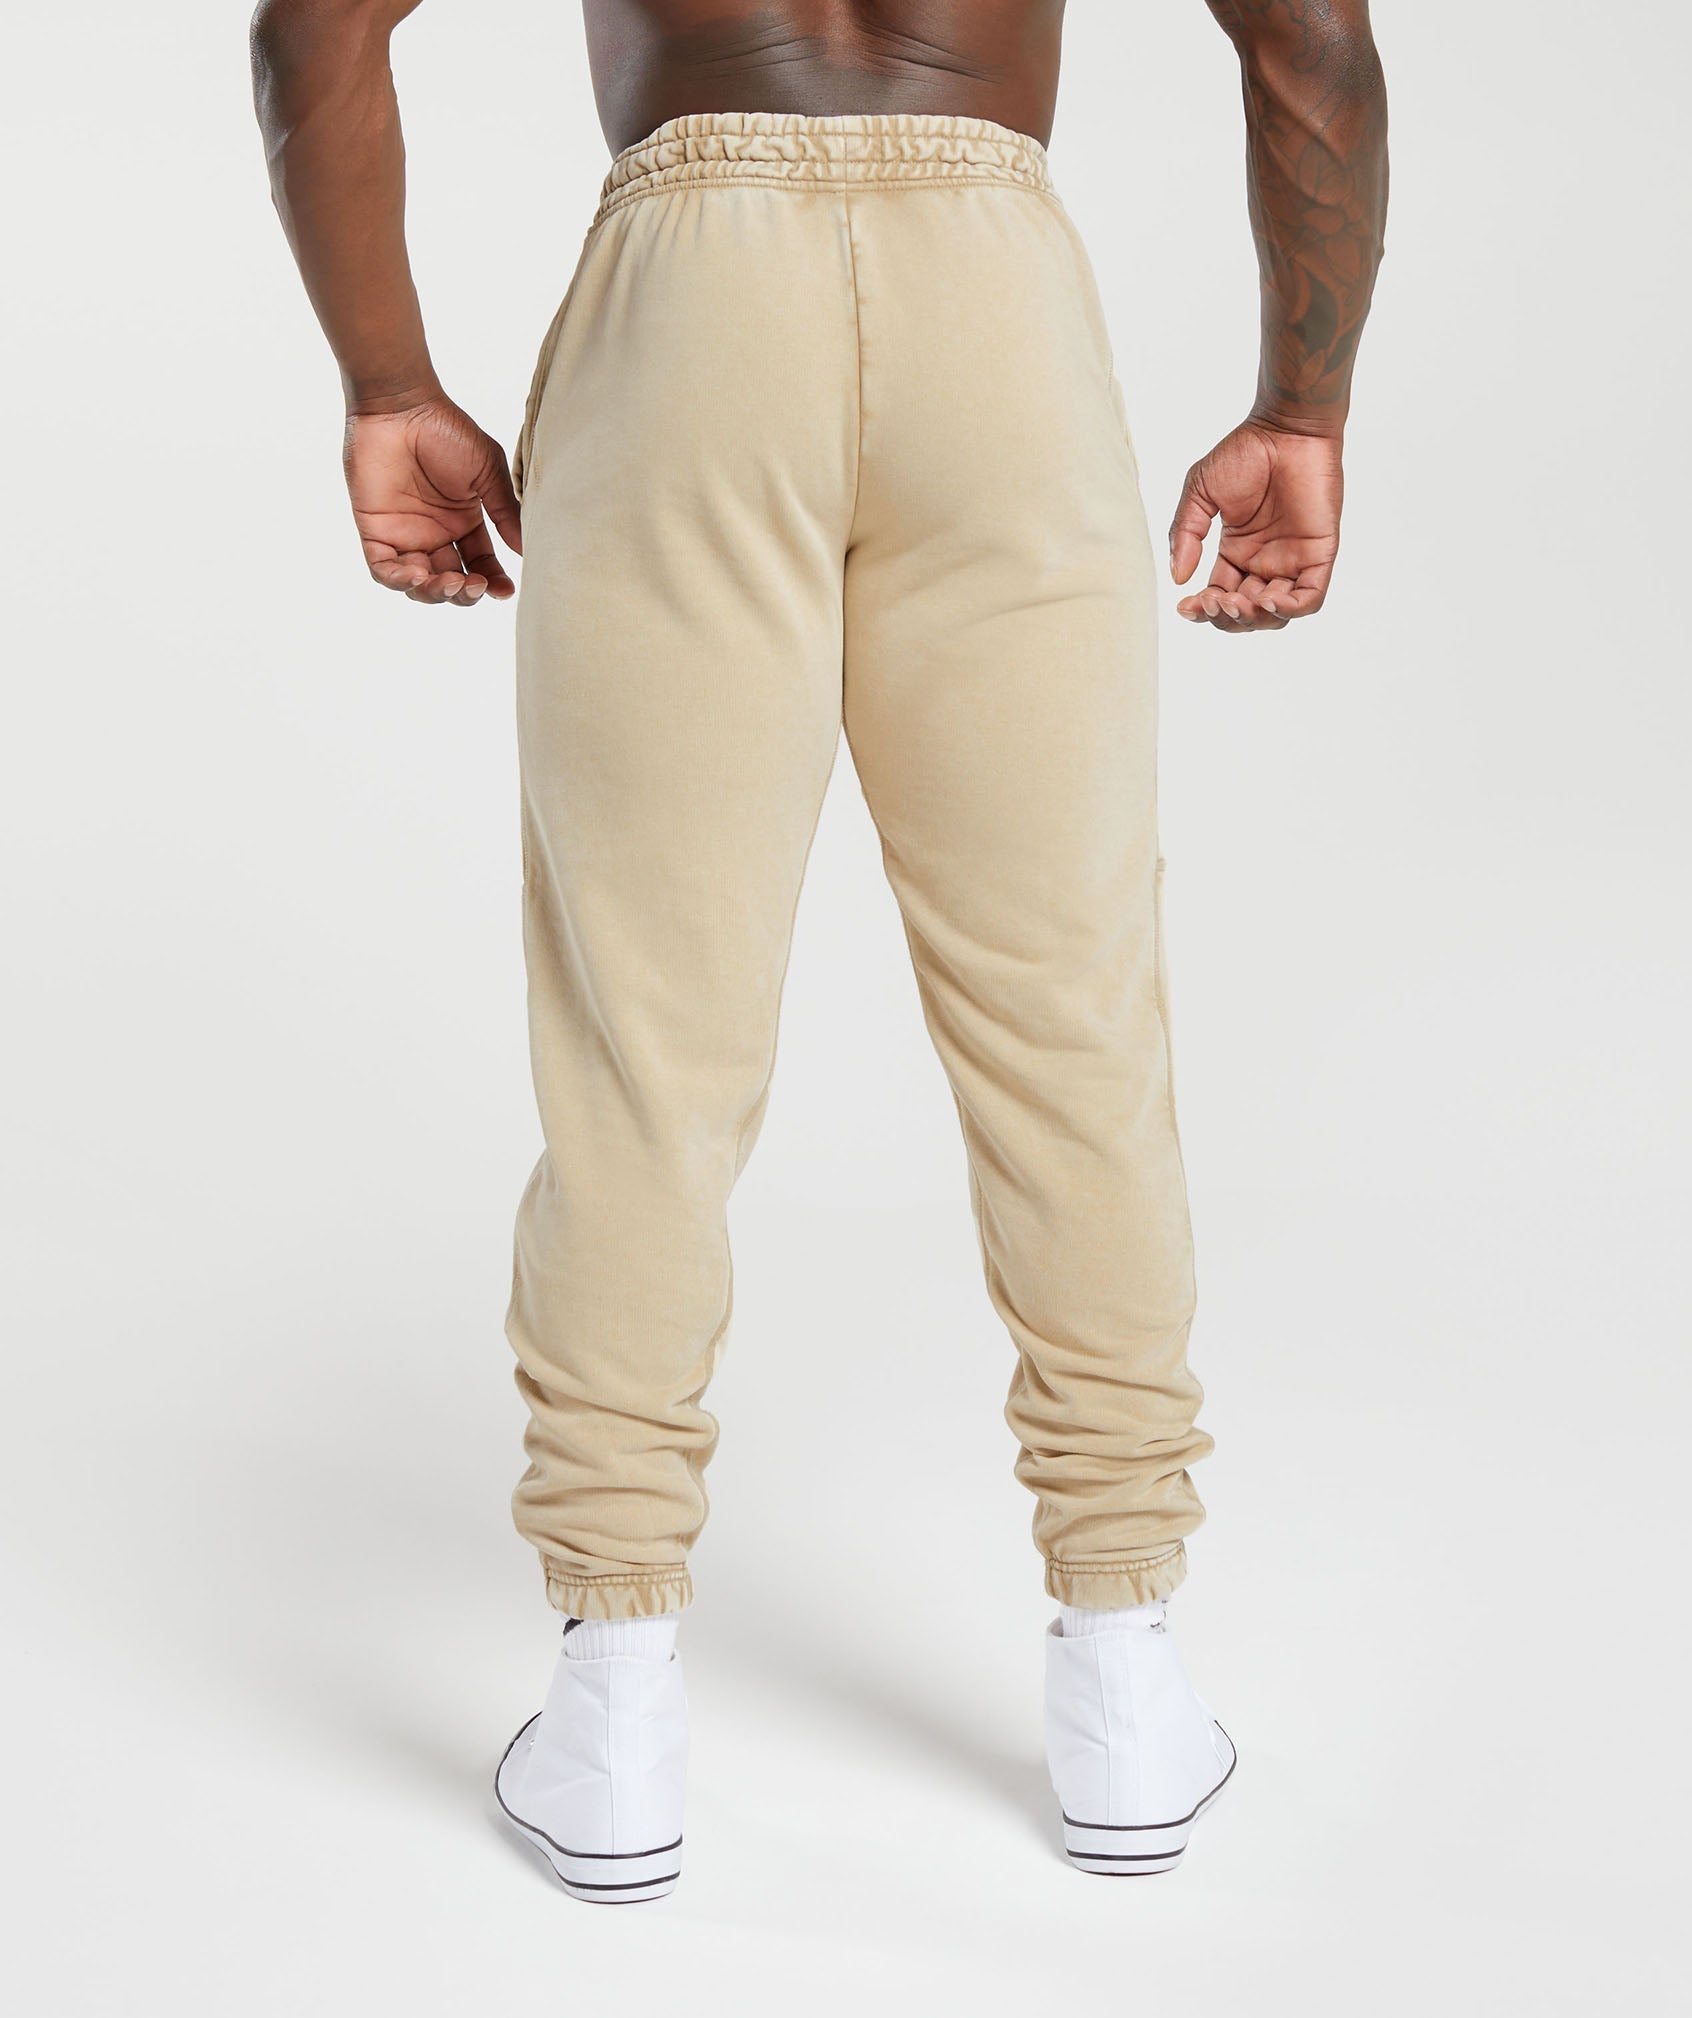 Gymshark Rest Day Track Pants - Camo Brown